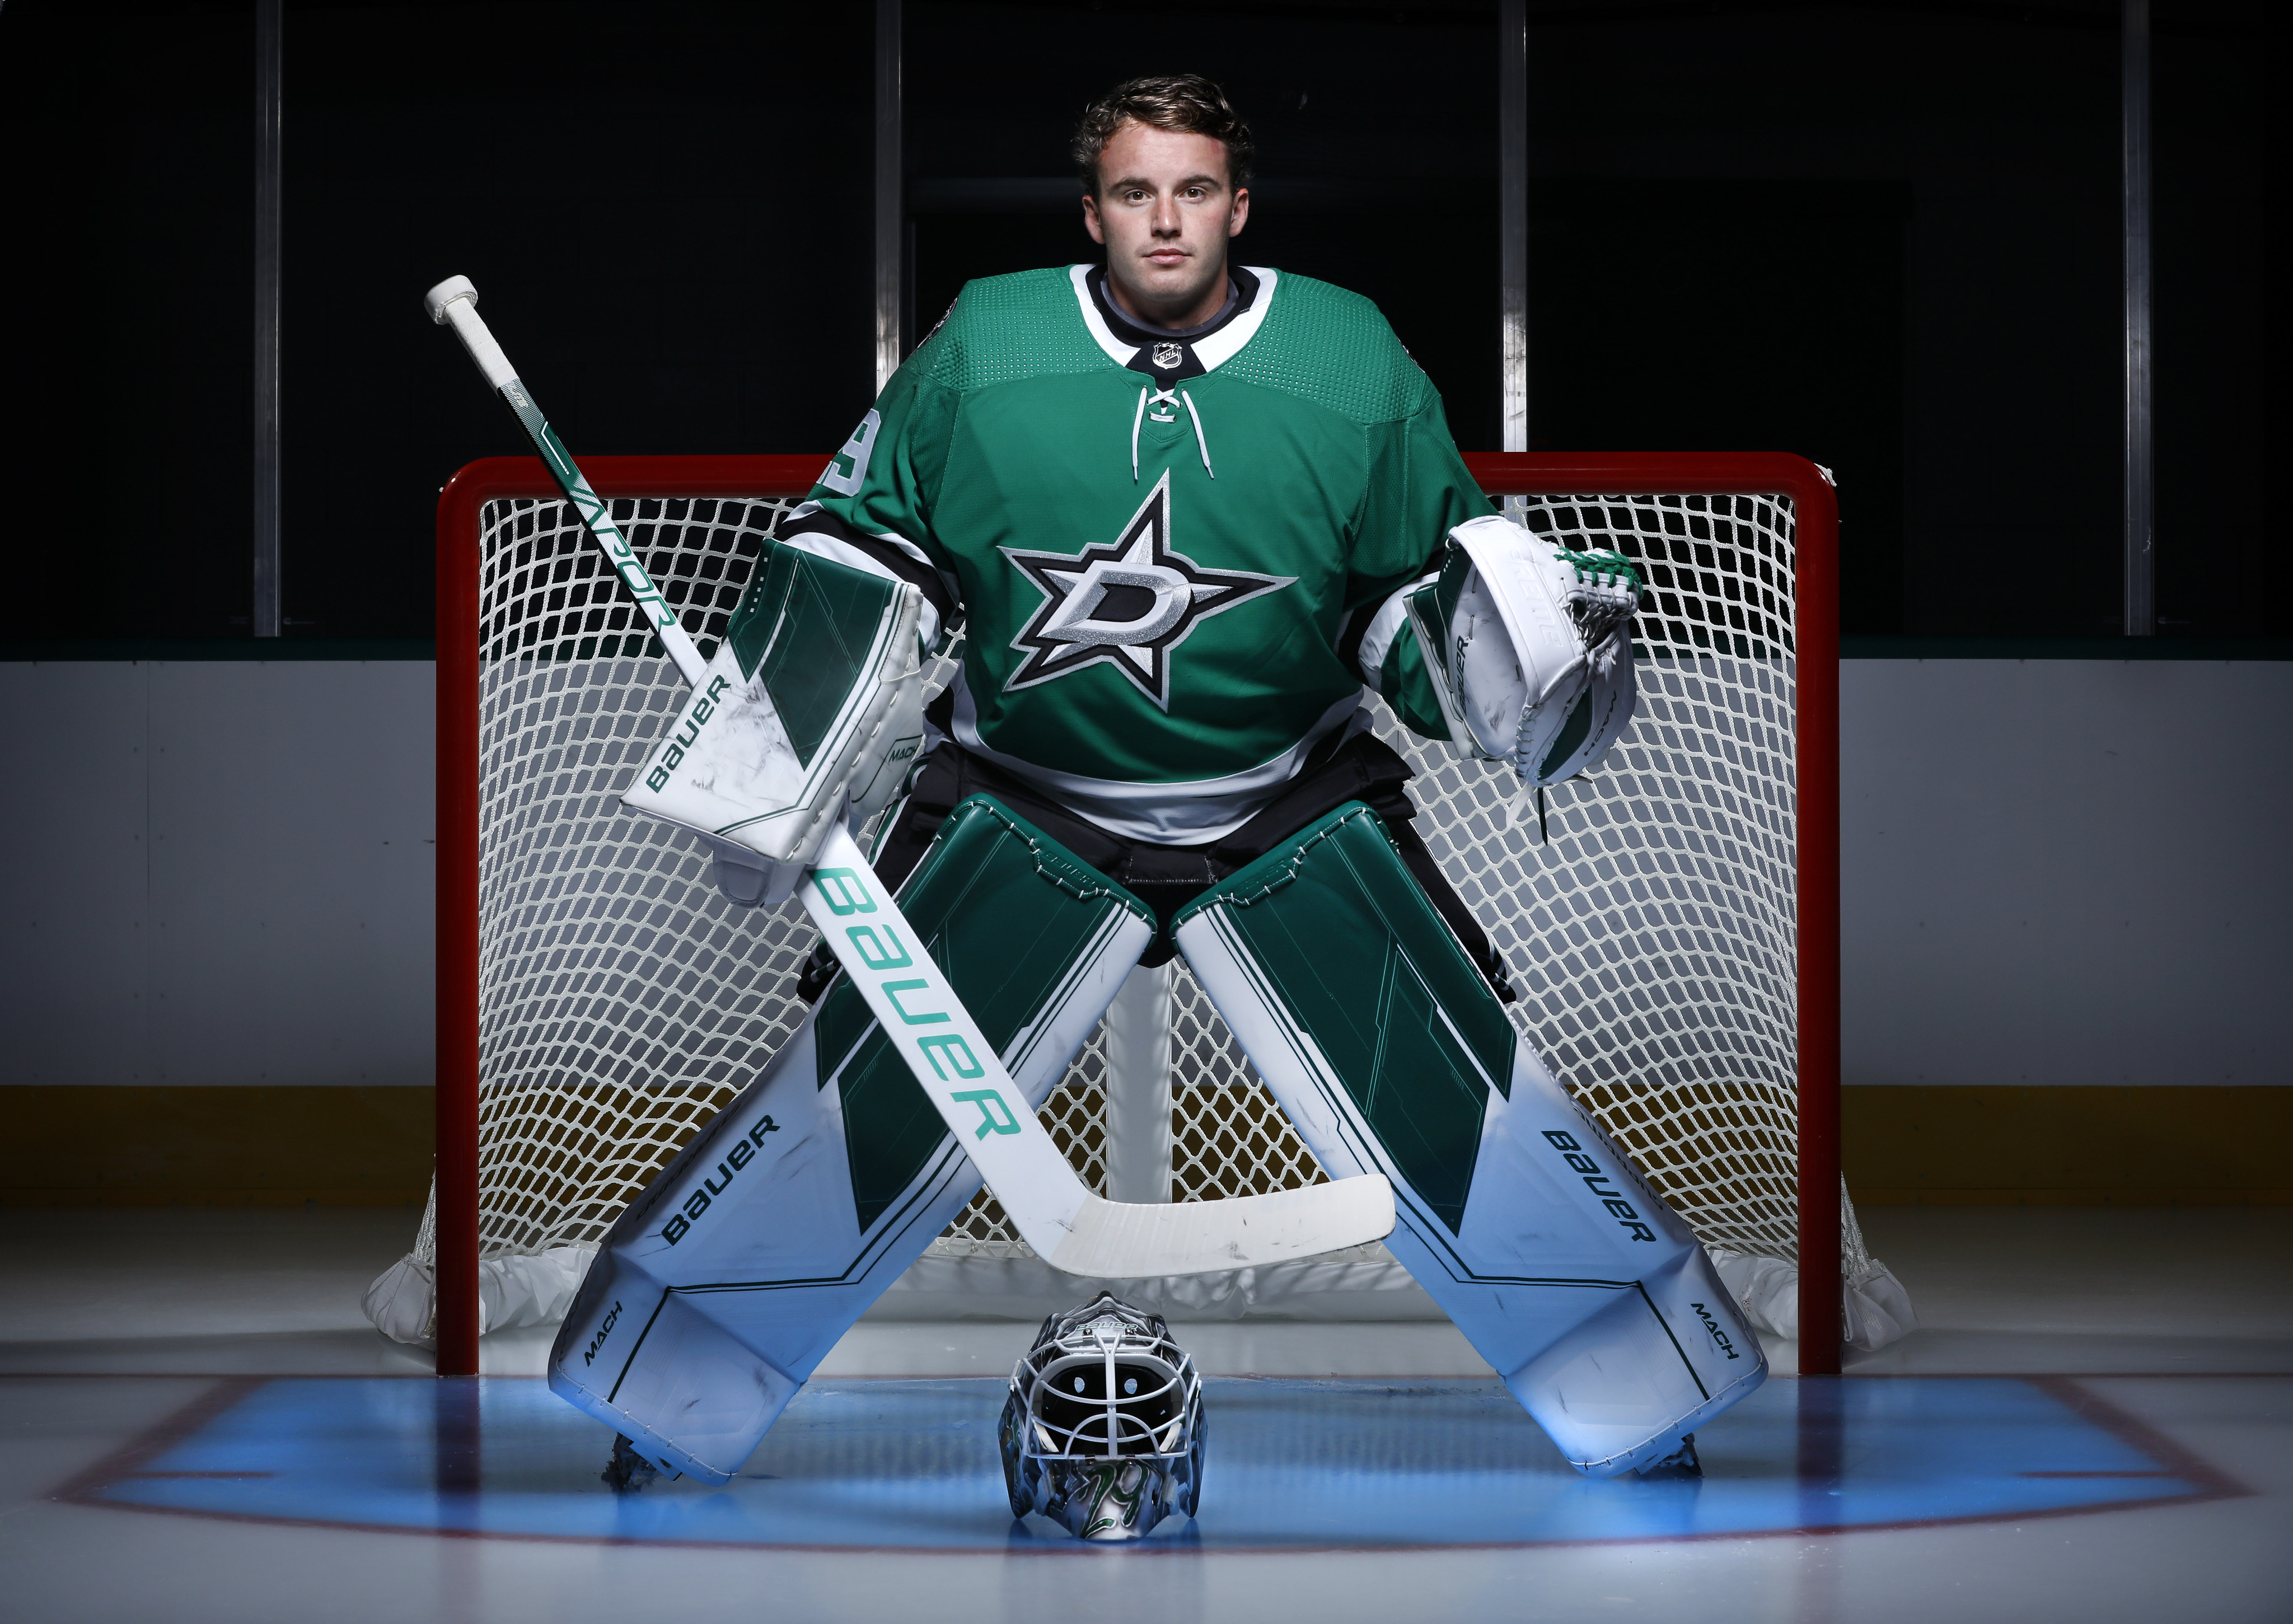 Jake Oettinger's competitive fire helps make him Dallas Stars' future in  net - The Athletic